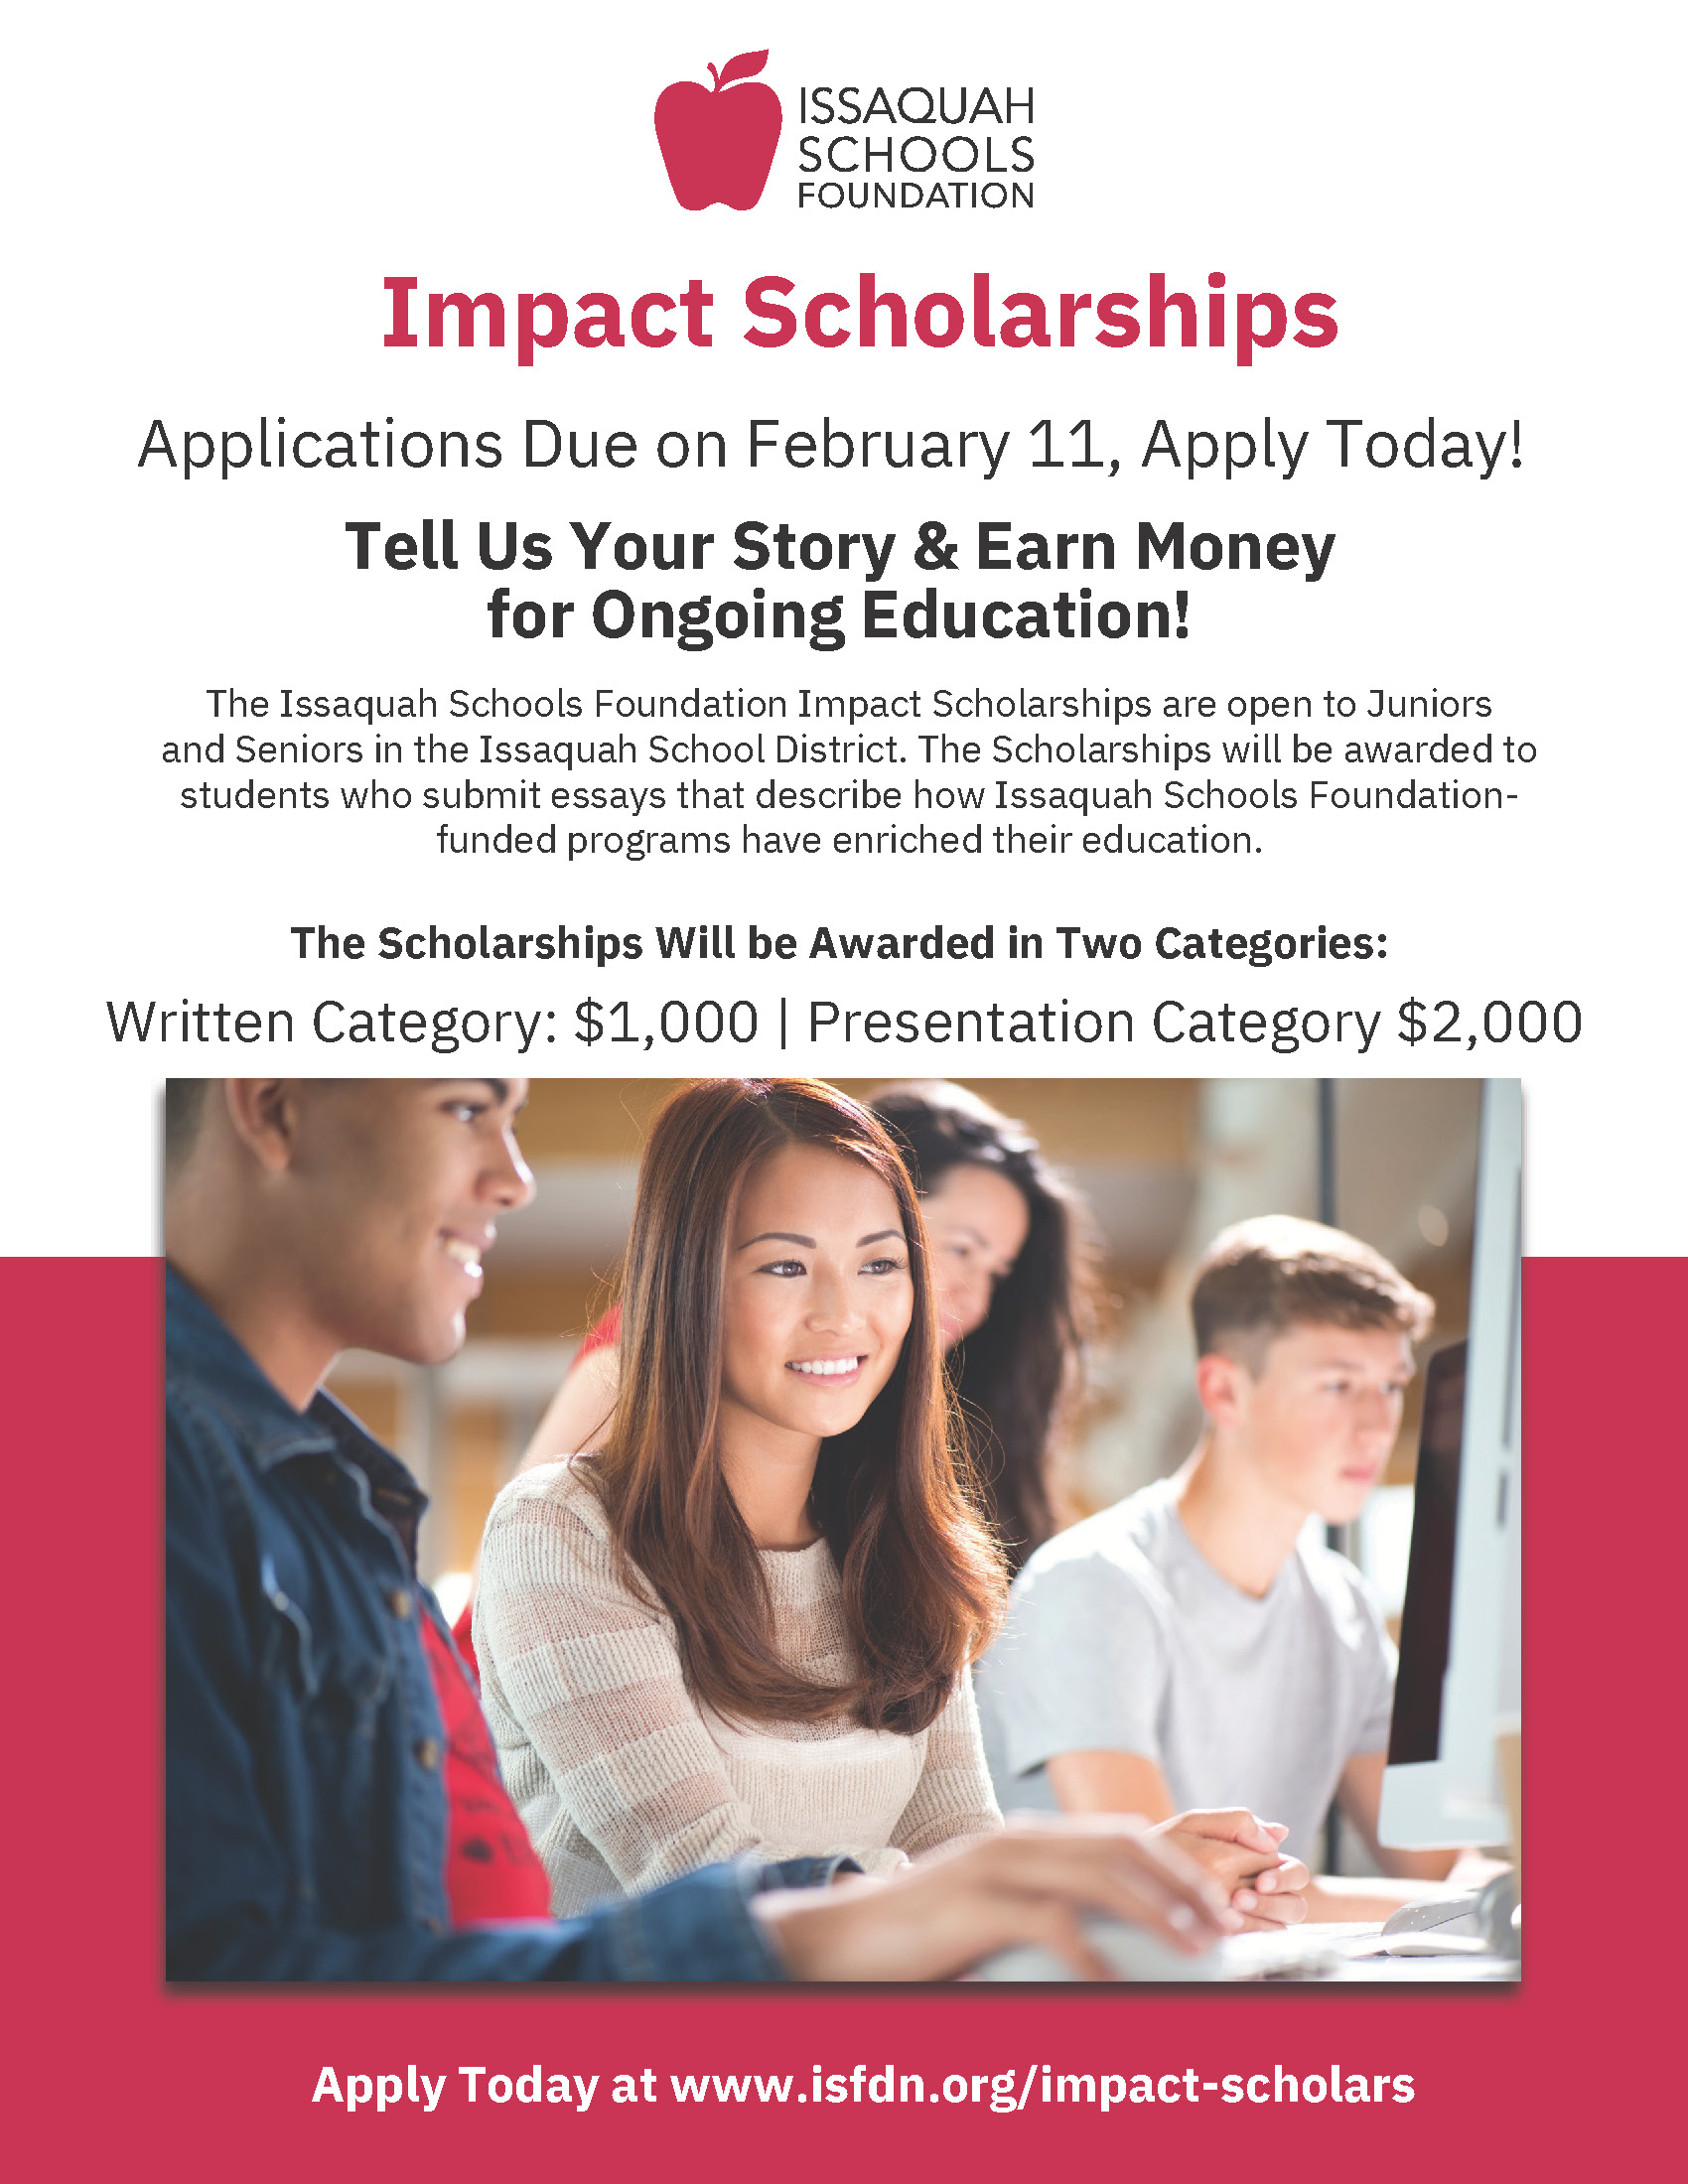 ISF Impact Scholarship Flyer in English